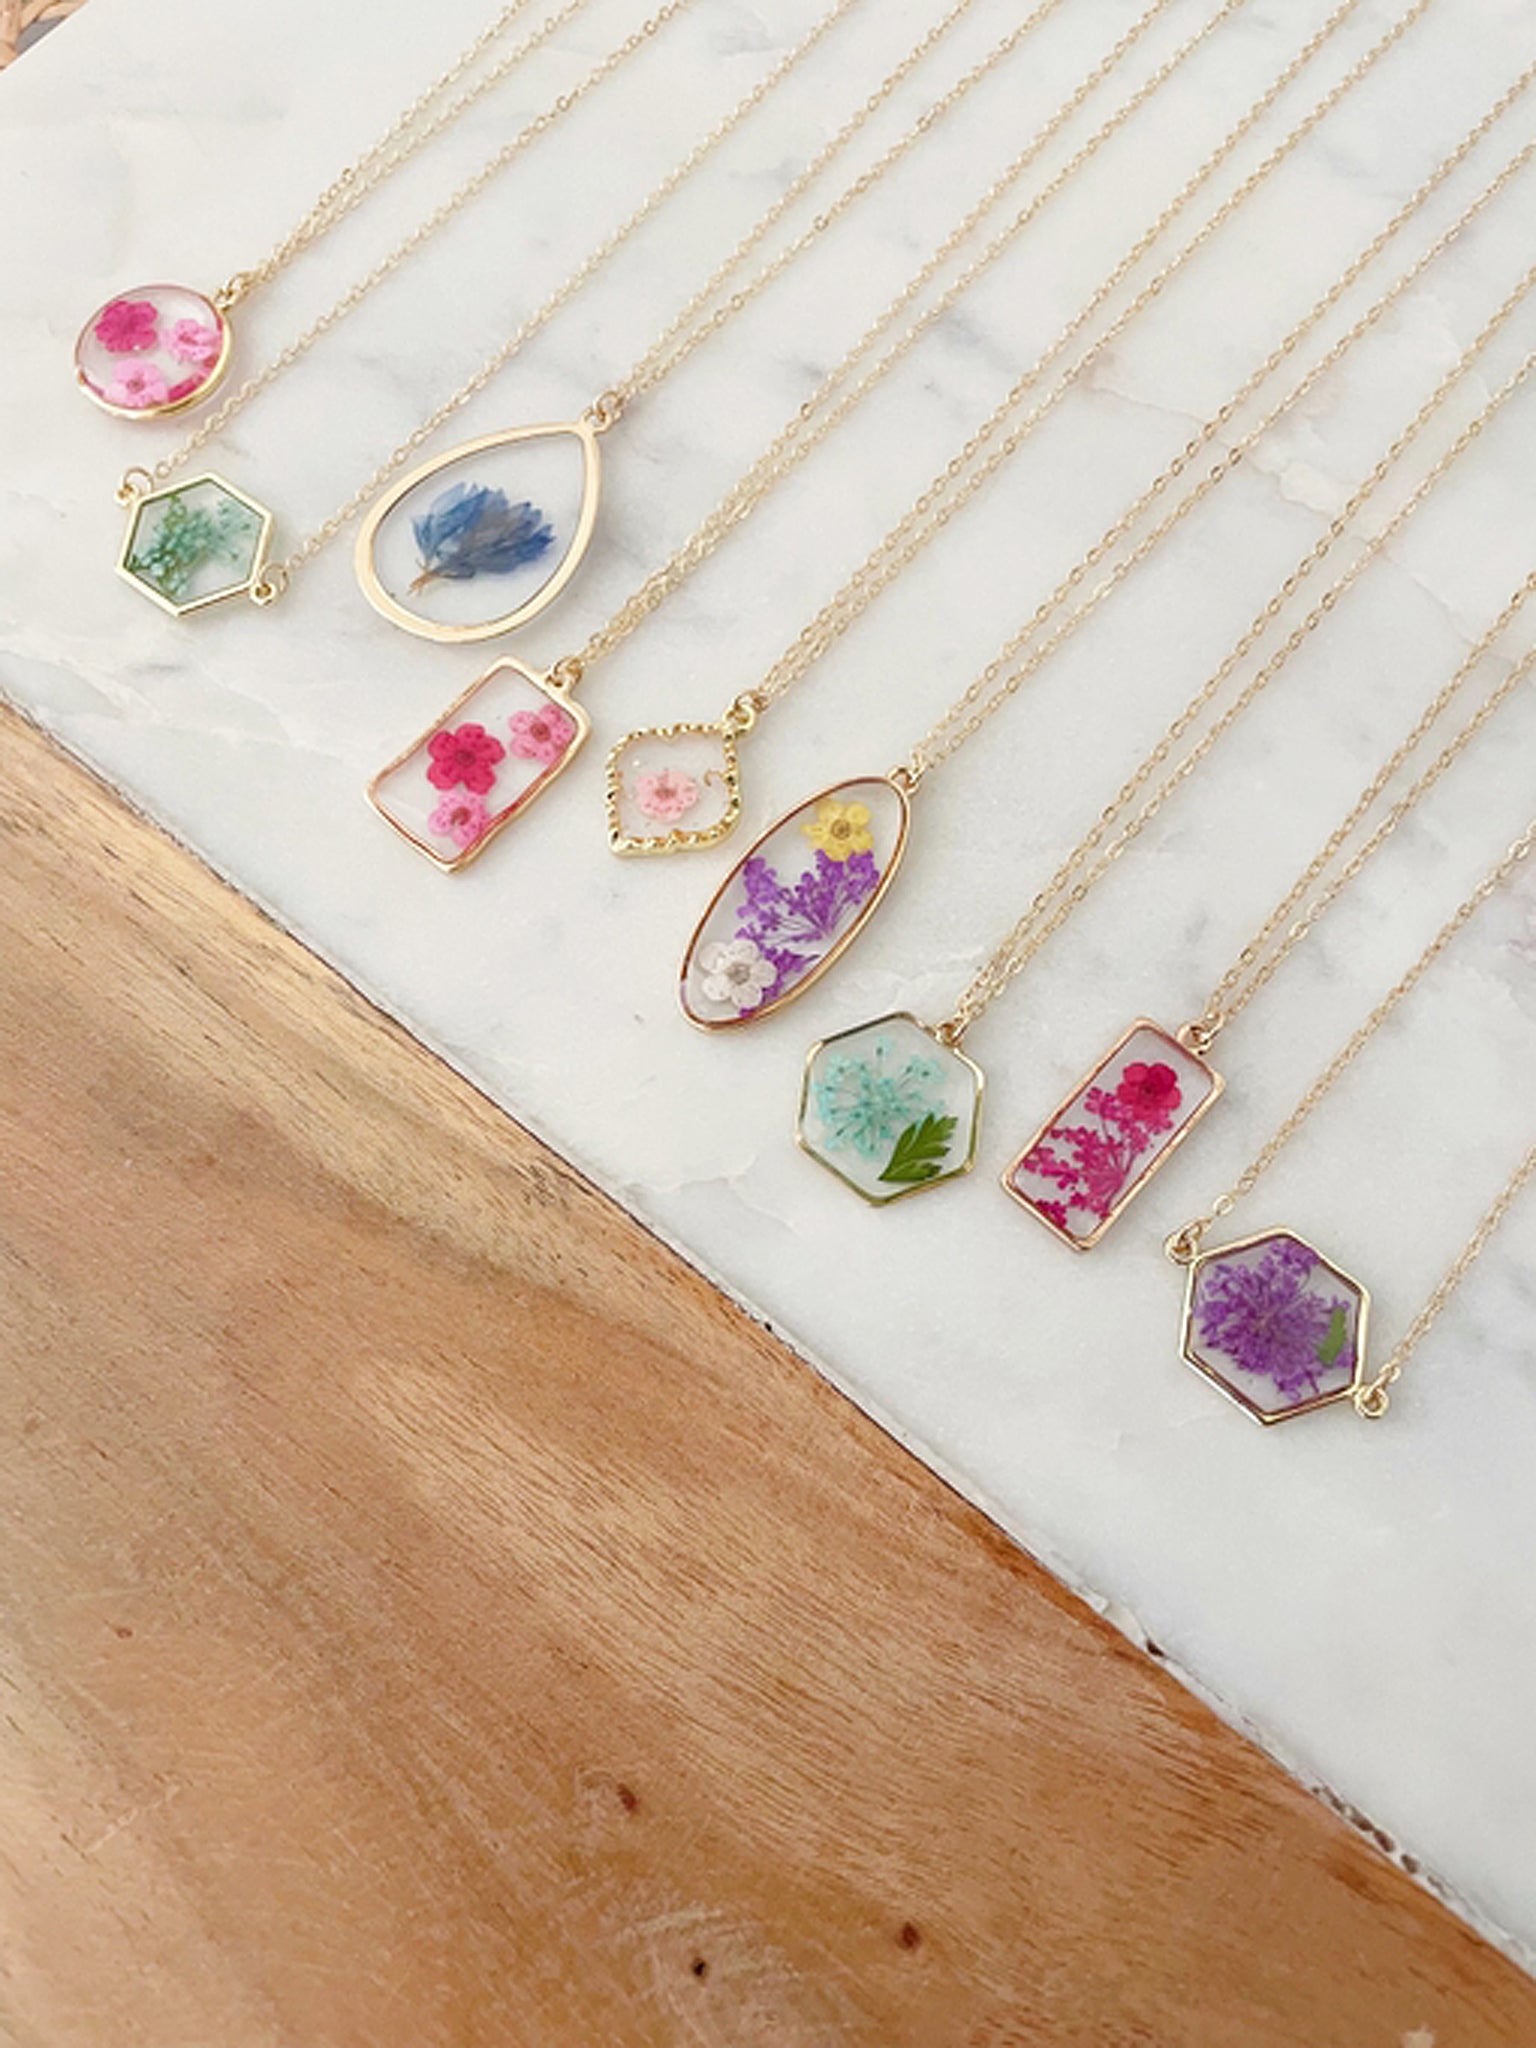 New Arrivals: Floral inspired Pendant Necklaces